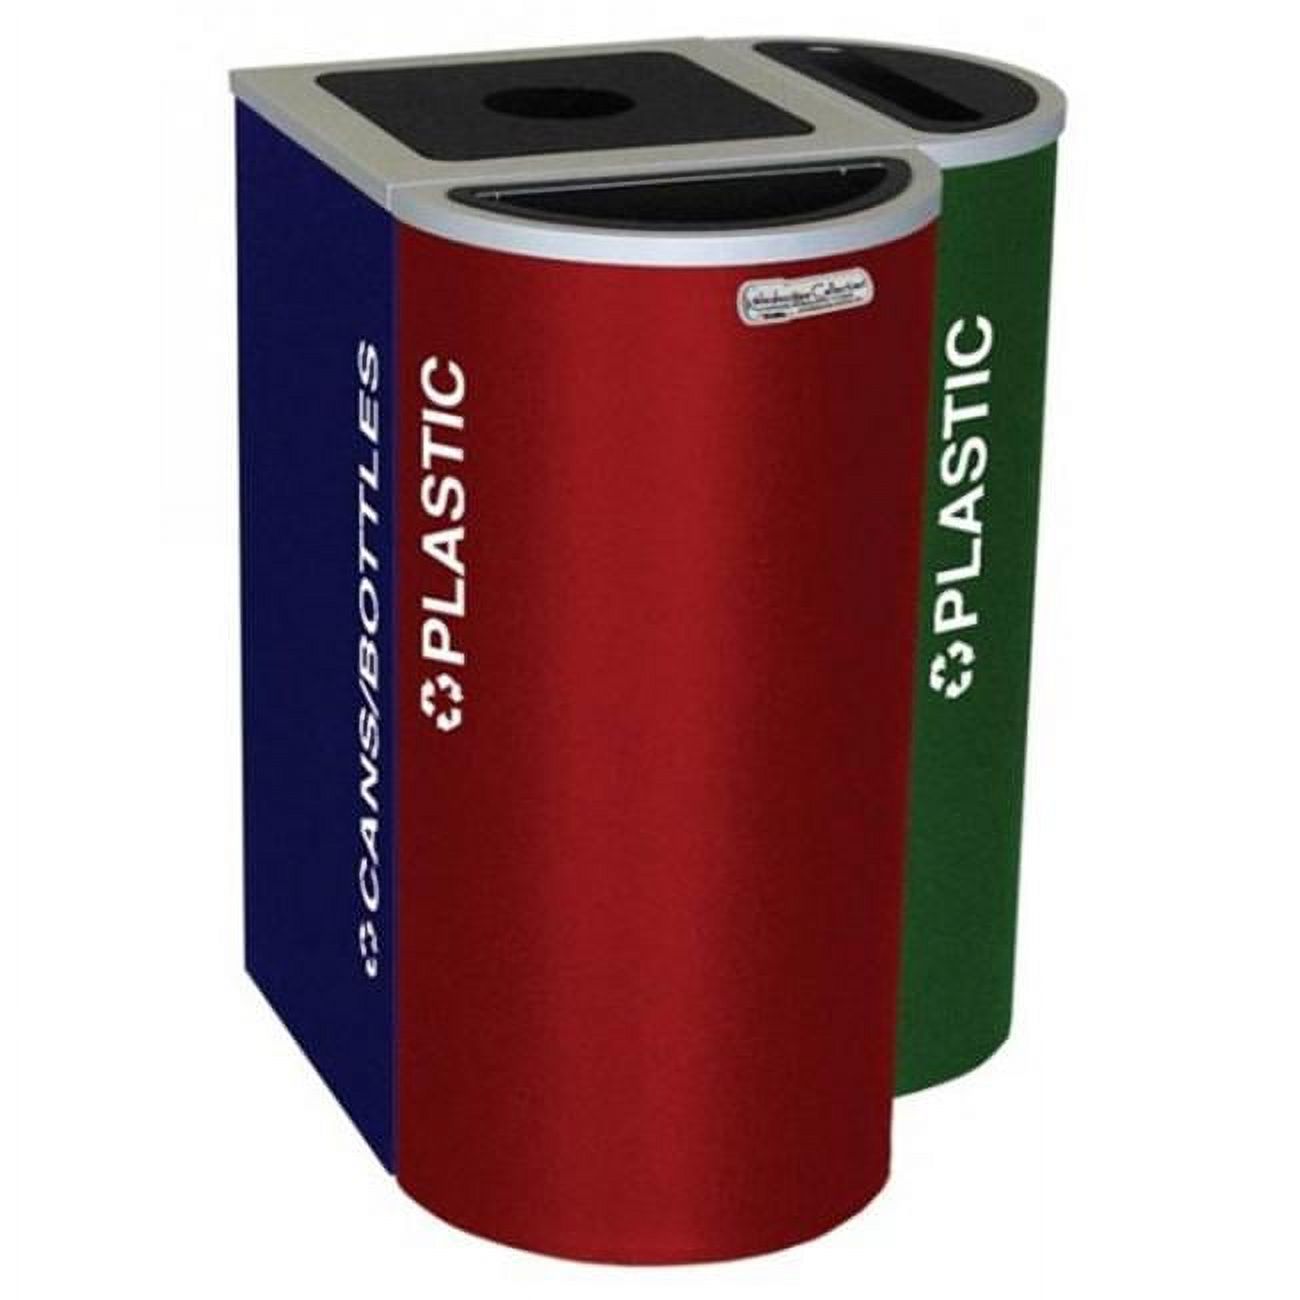 Ex-Cell Kaiser RC-KDHR-T EGX 8-gal recycling receptacle- half round top and Trash decal- Emerald Texture finish - image 1 of 4